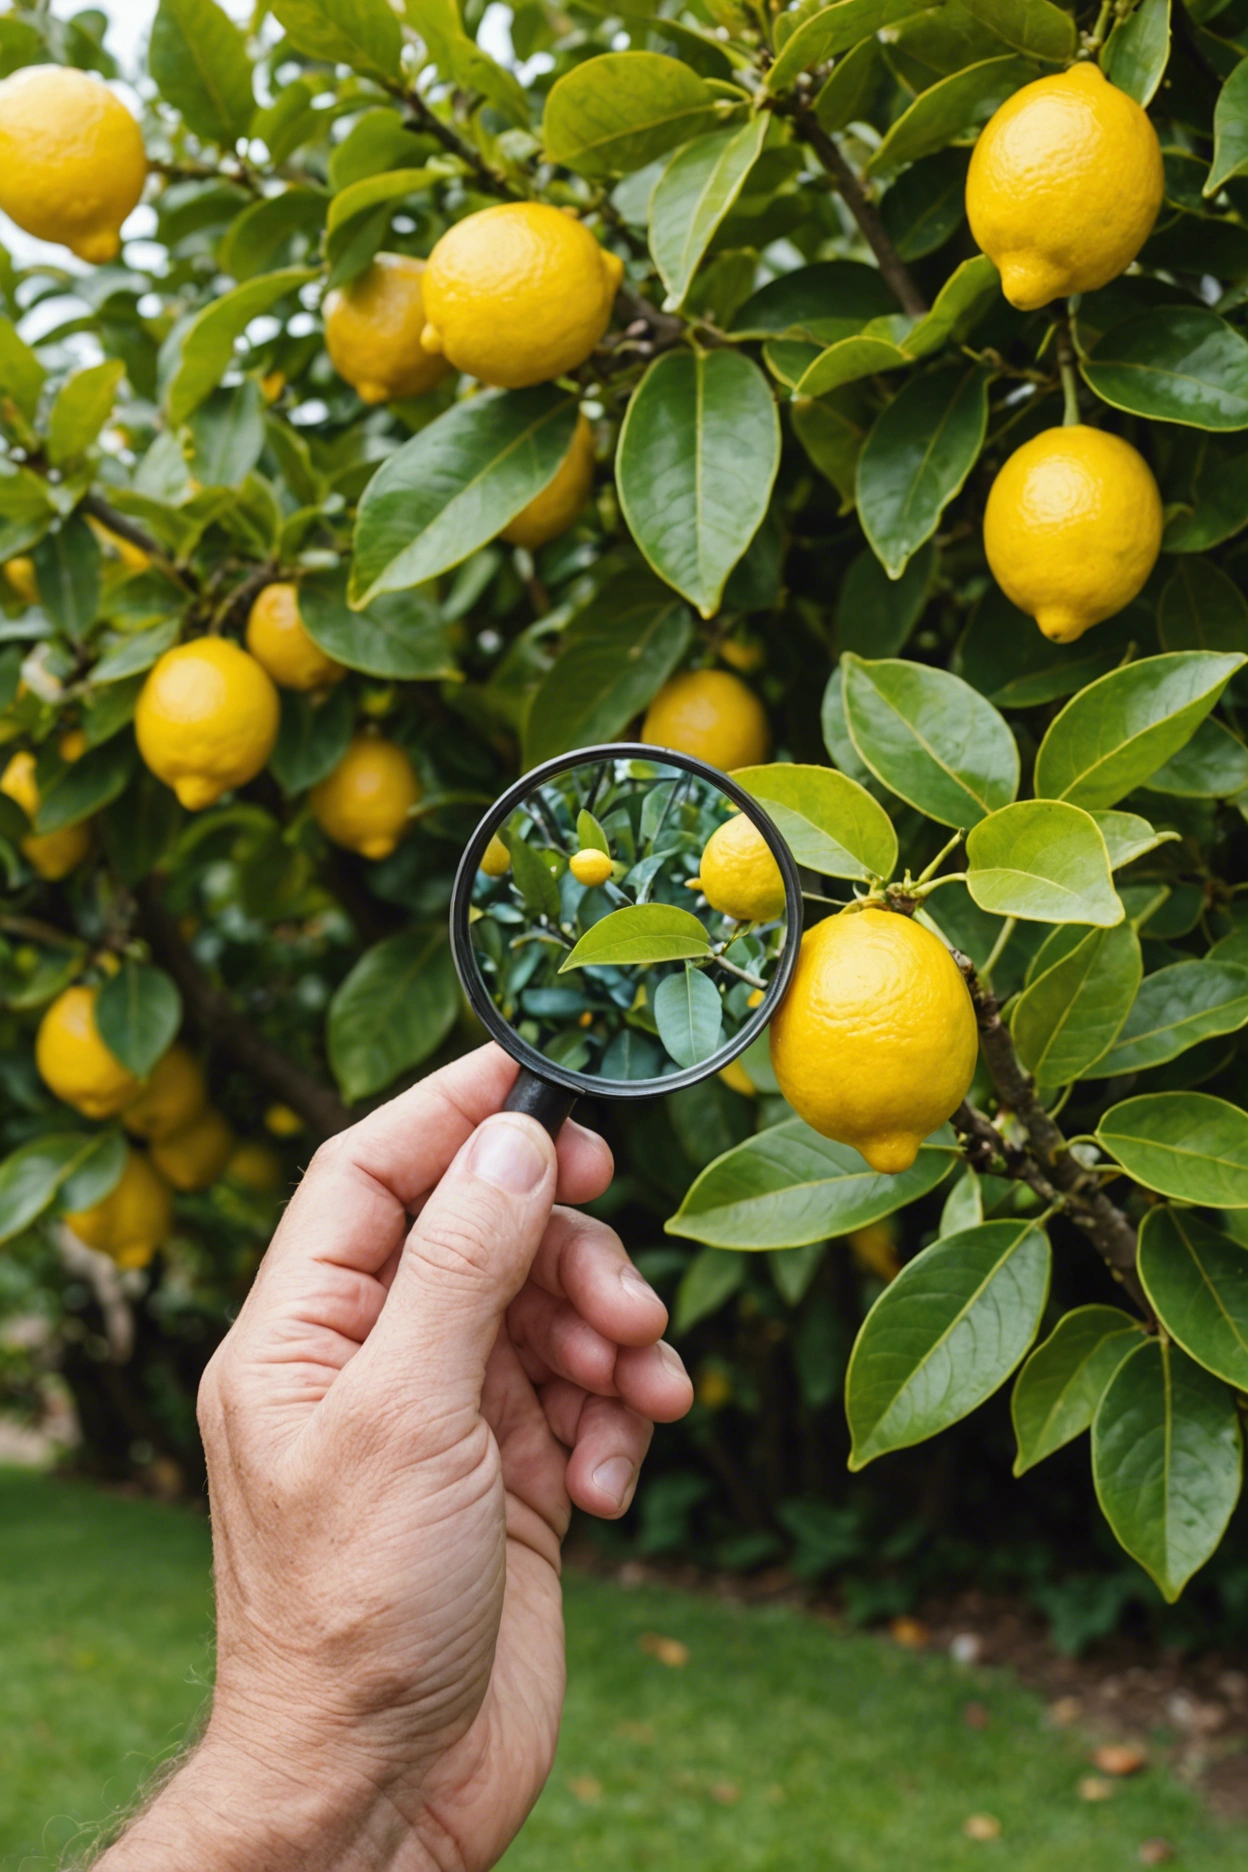 "Gardener's hand holding a magnifying glass inspecting yellowing leaves on a lemon tree, with blurred gardening tools in the background."